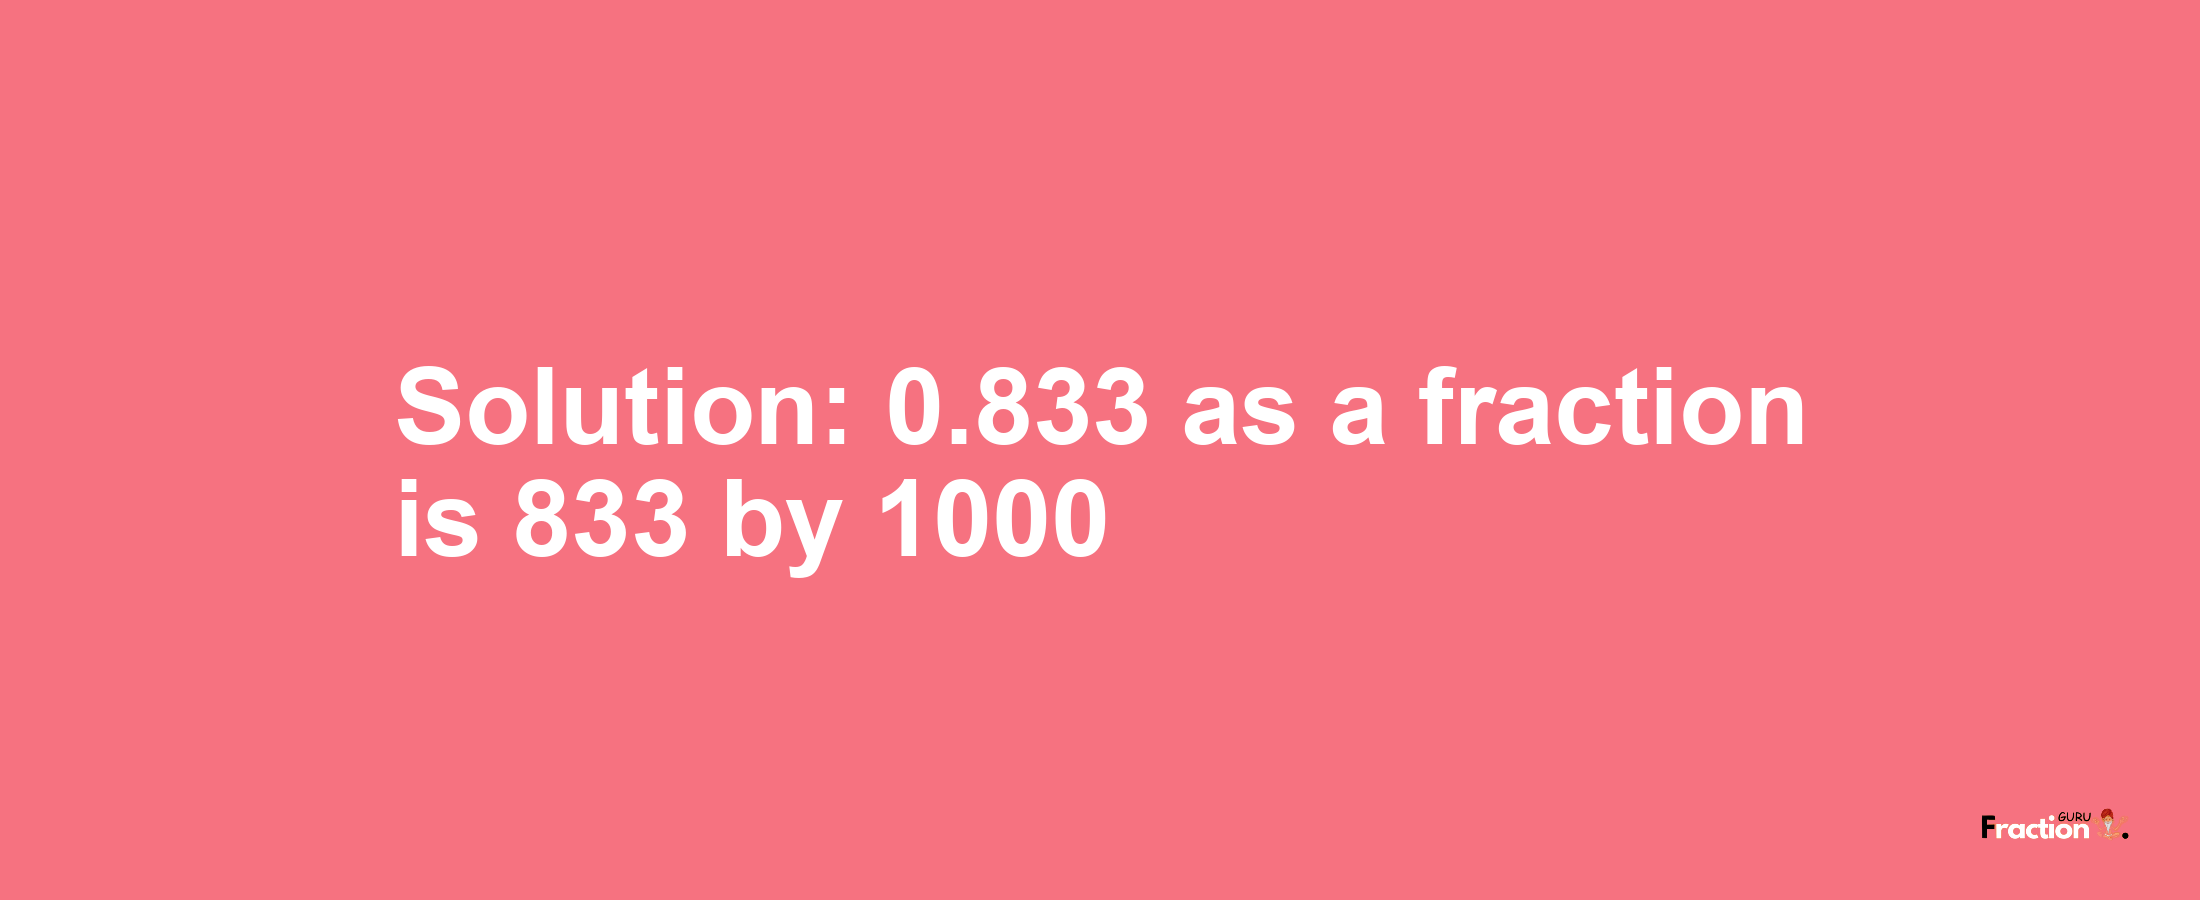 Solution:0.833 as a fraction is 833/1000